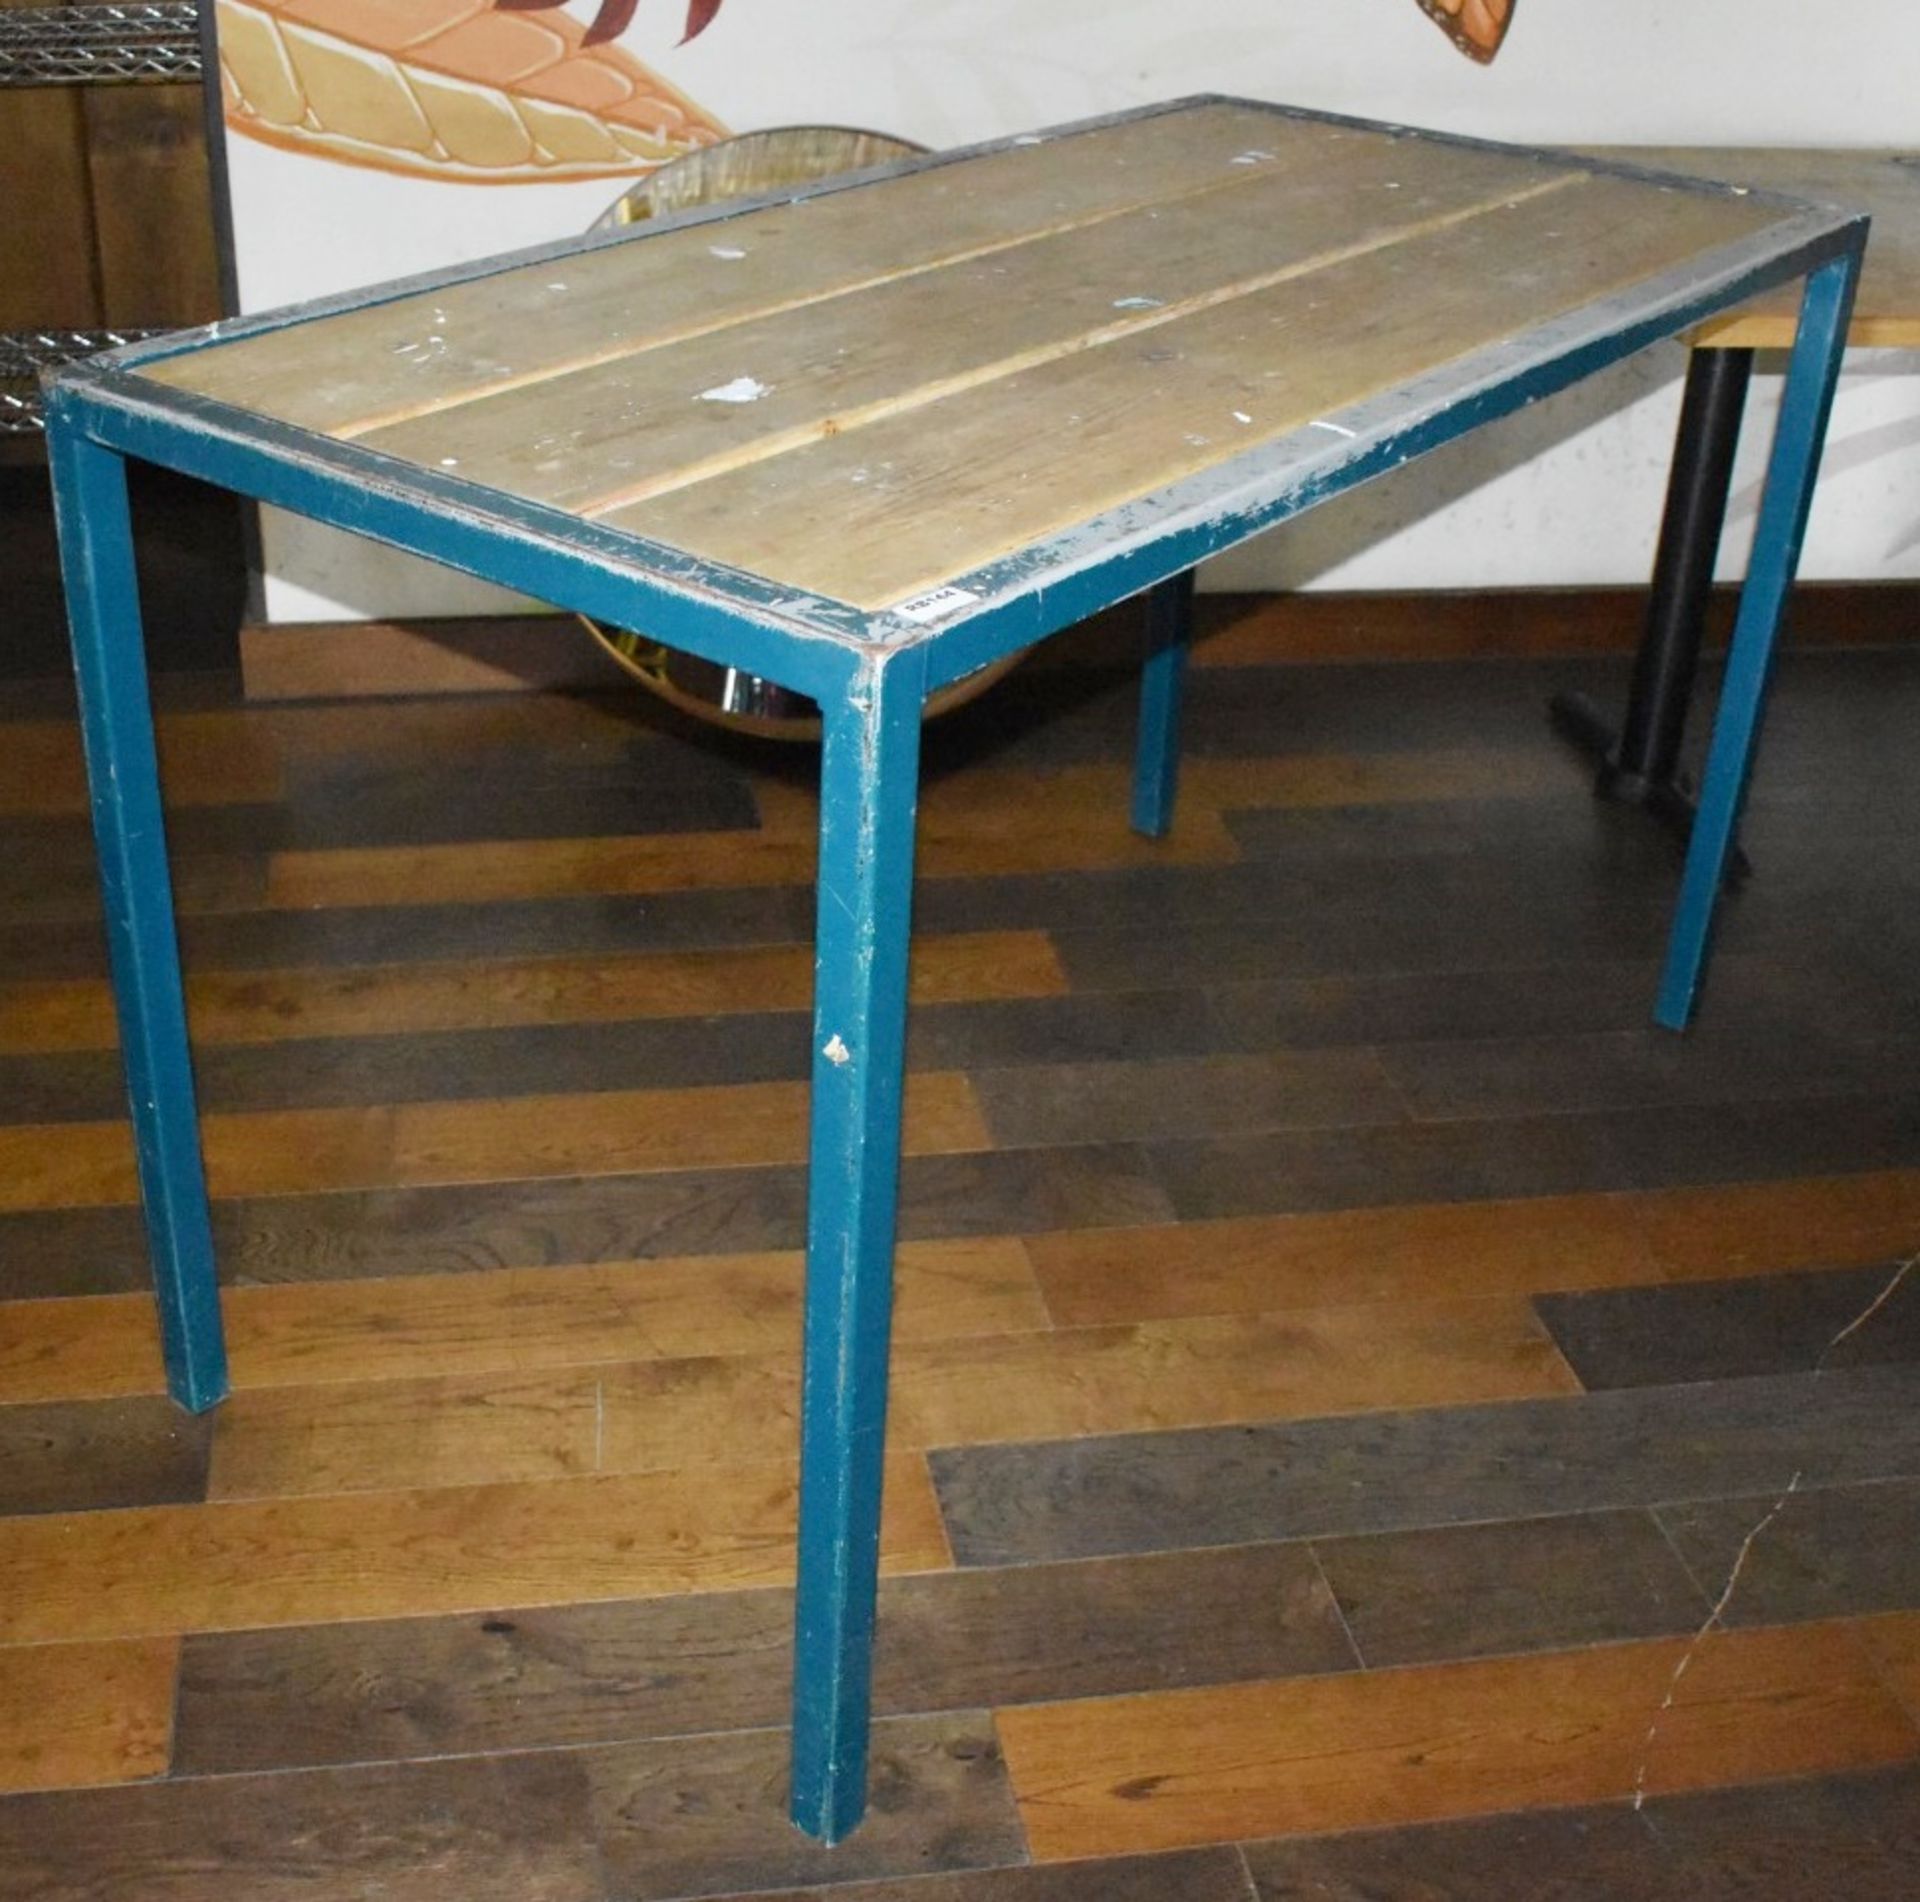 2 x High-Level Restaurant Bench Tables With Wood Panelled Tops and Metal Frames - Ref: RB144 - CL558